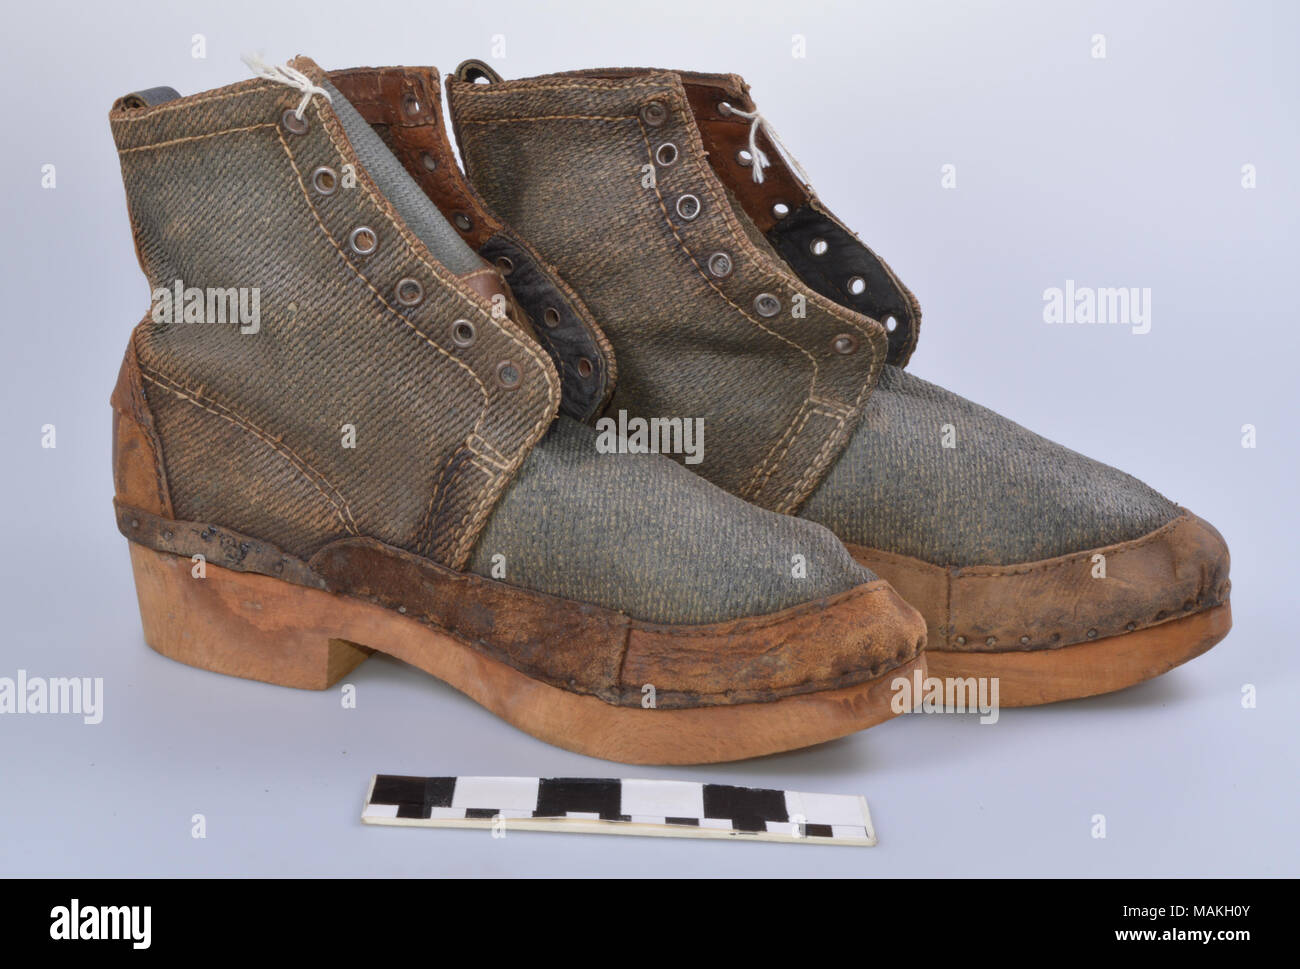 Pair of men's short boots made of canvas, leather and wood. Soles are solid wood and have a 1 1/2 inch heel. Eyelets on sides for laces. Taken from a German Army material dump in Wolsfeld, Germany by James Marsh Douglas during World War I. Title: German Canvas Wood Sole Military Boots  . 1918. Stock Photo